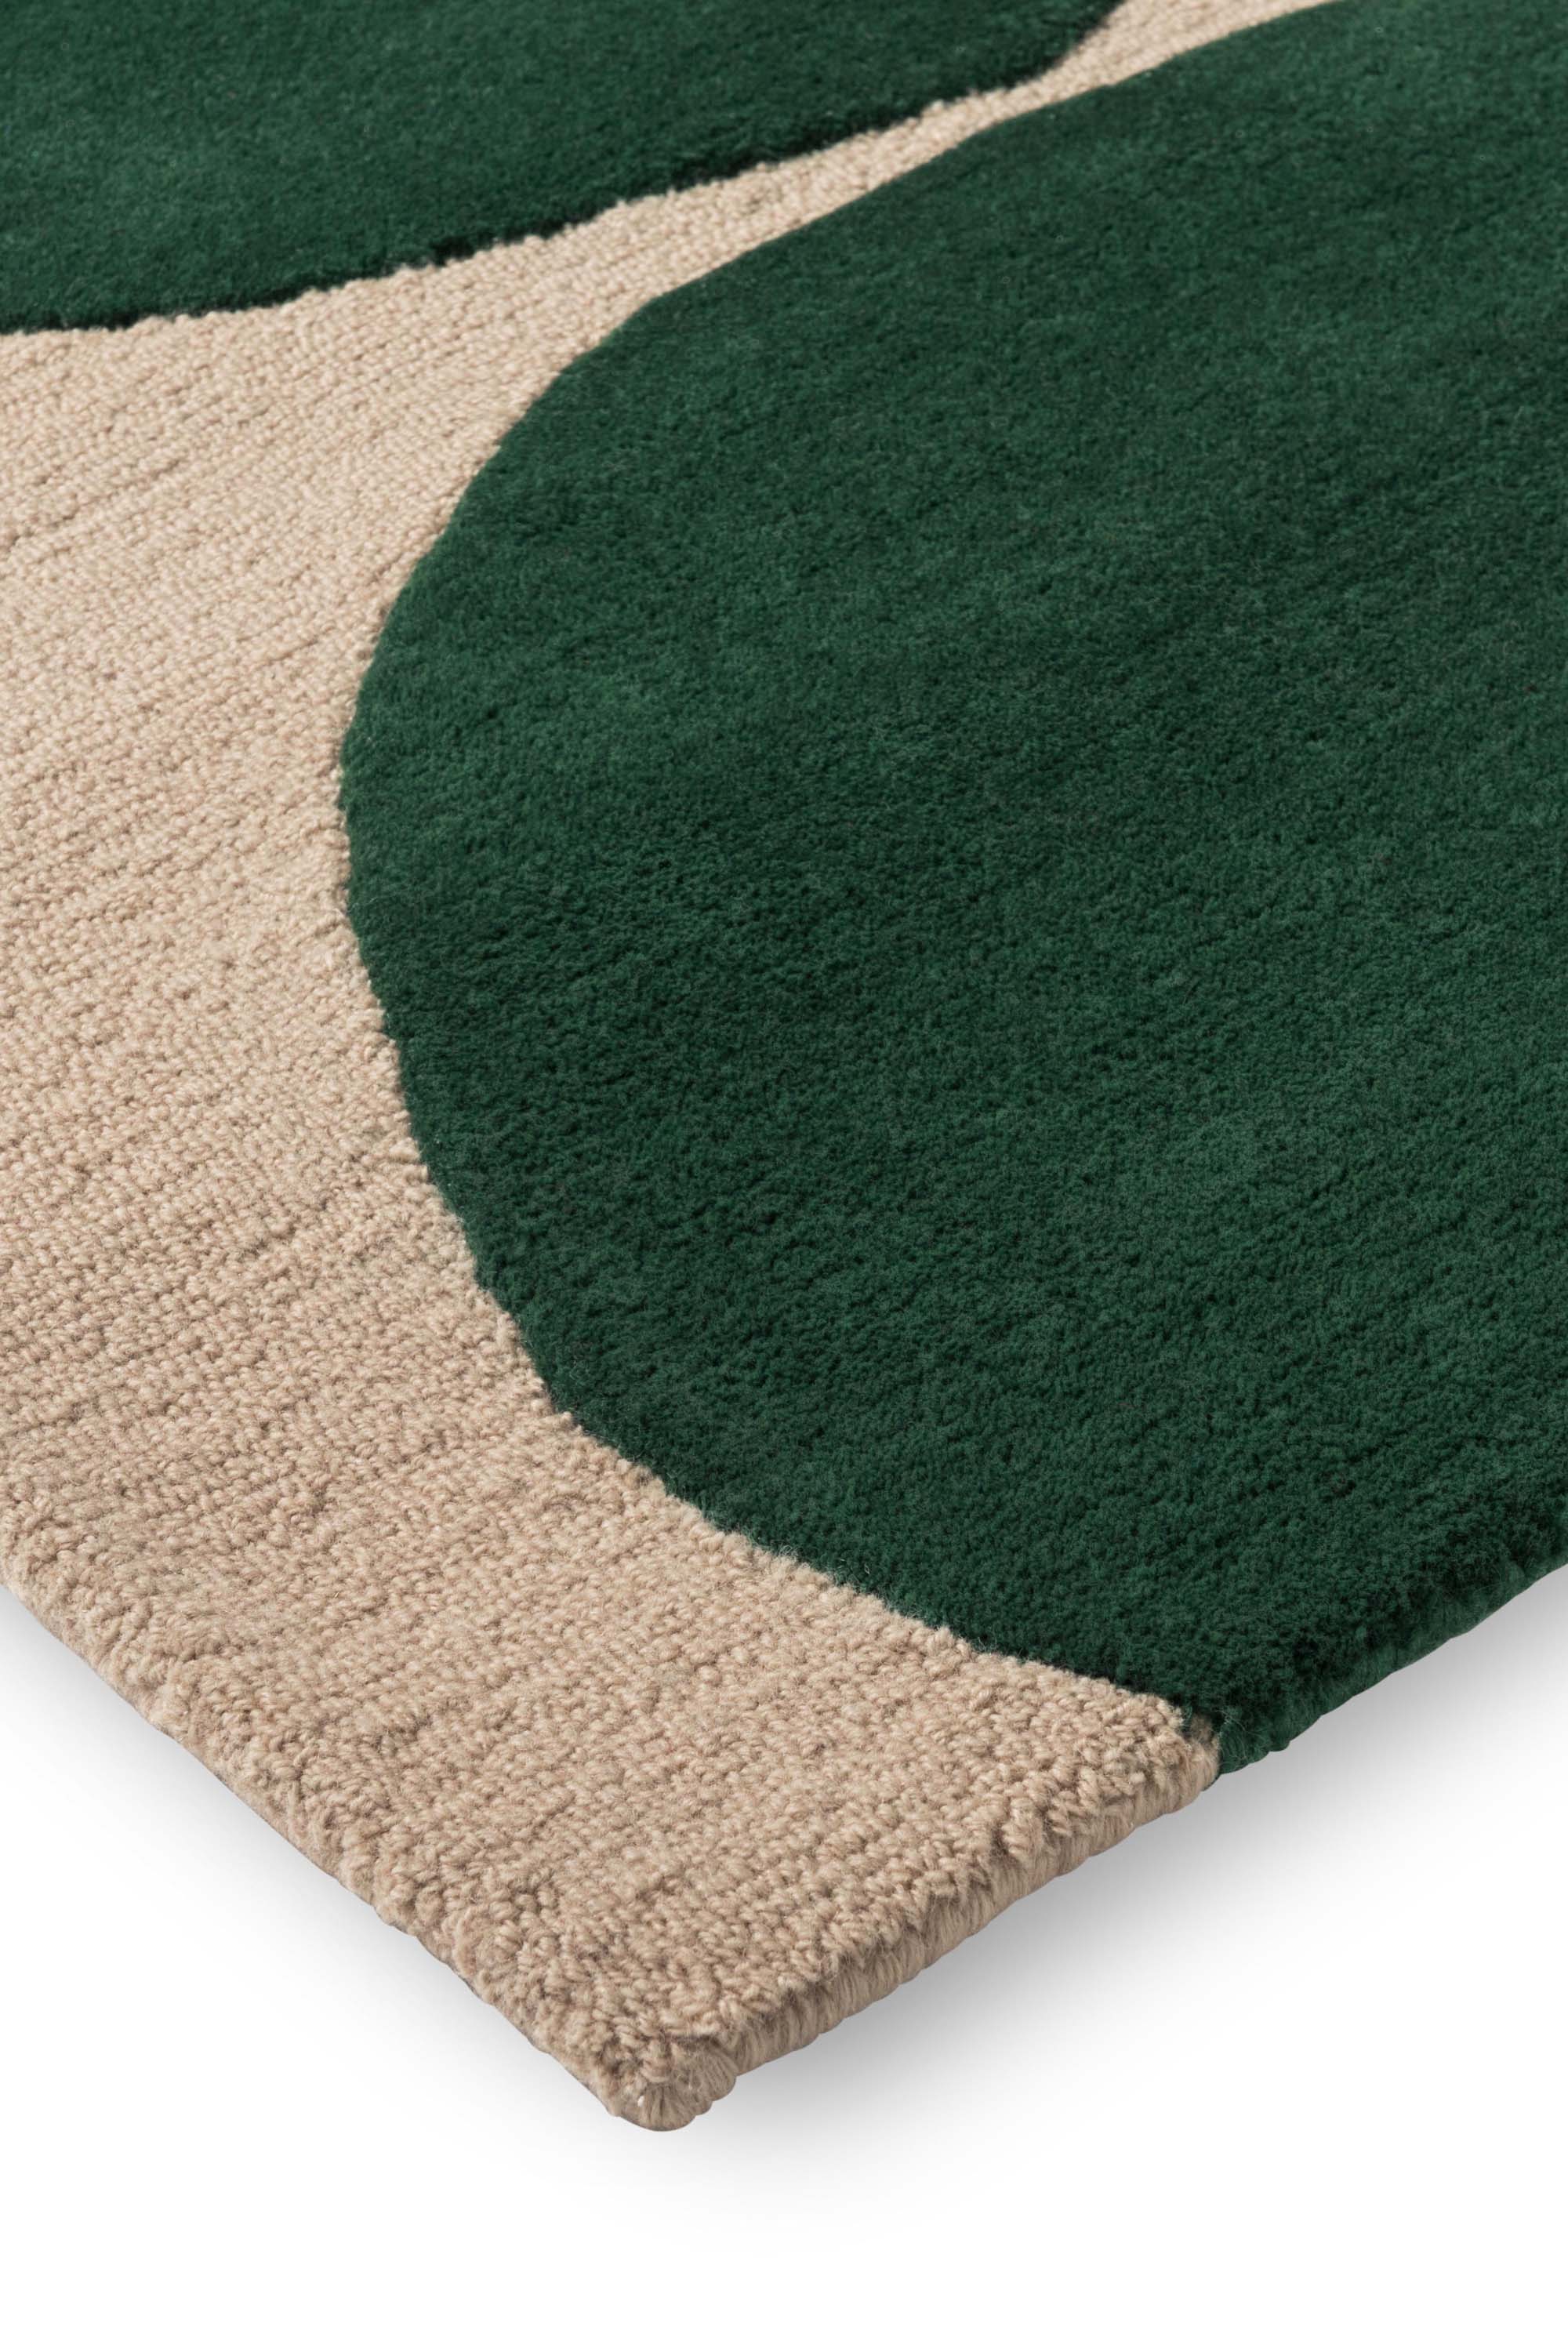 Beige rug with green repeated circle pattern